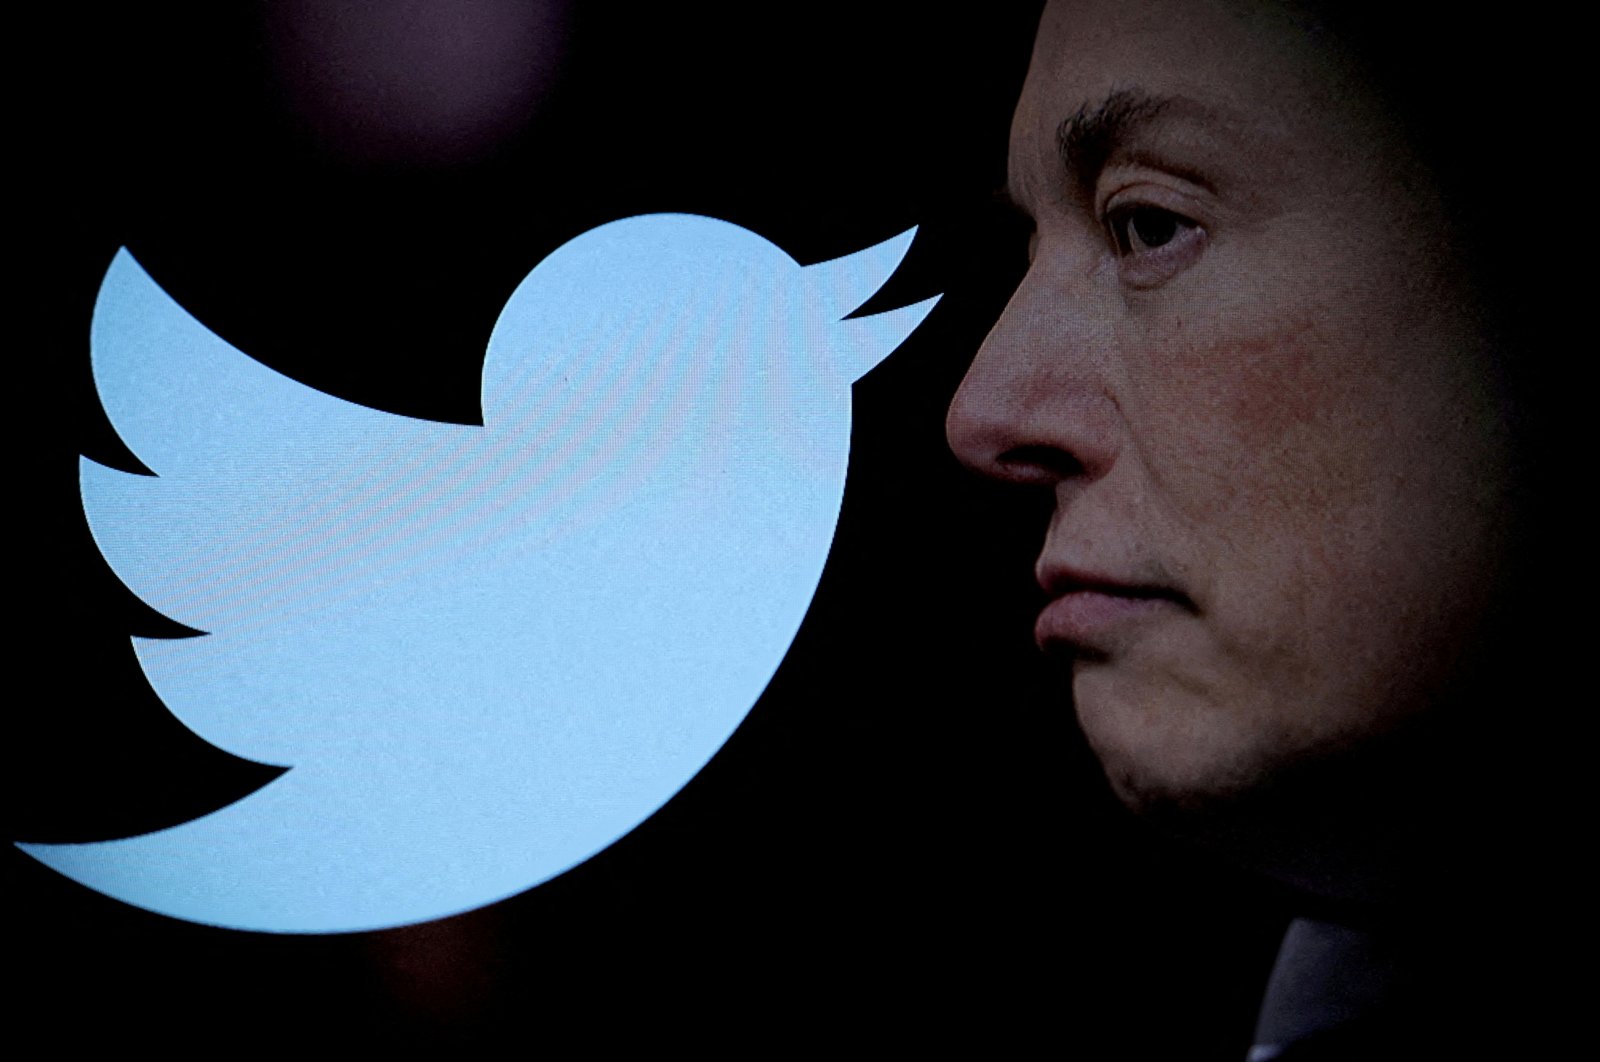 FILE PHOTO: Twitter logo and a photo of Elon Musk are displayed through a magnifier in this illustration taken Oct. 27, 2022. (Reuters Photo)